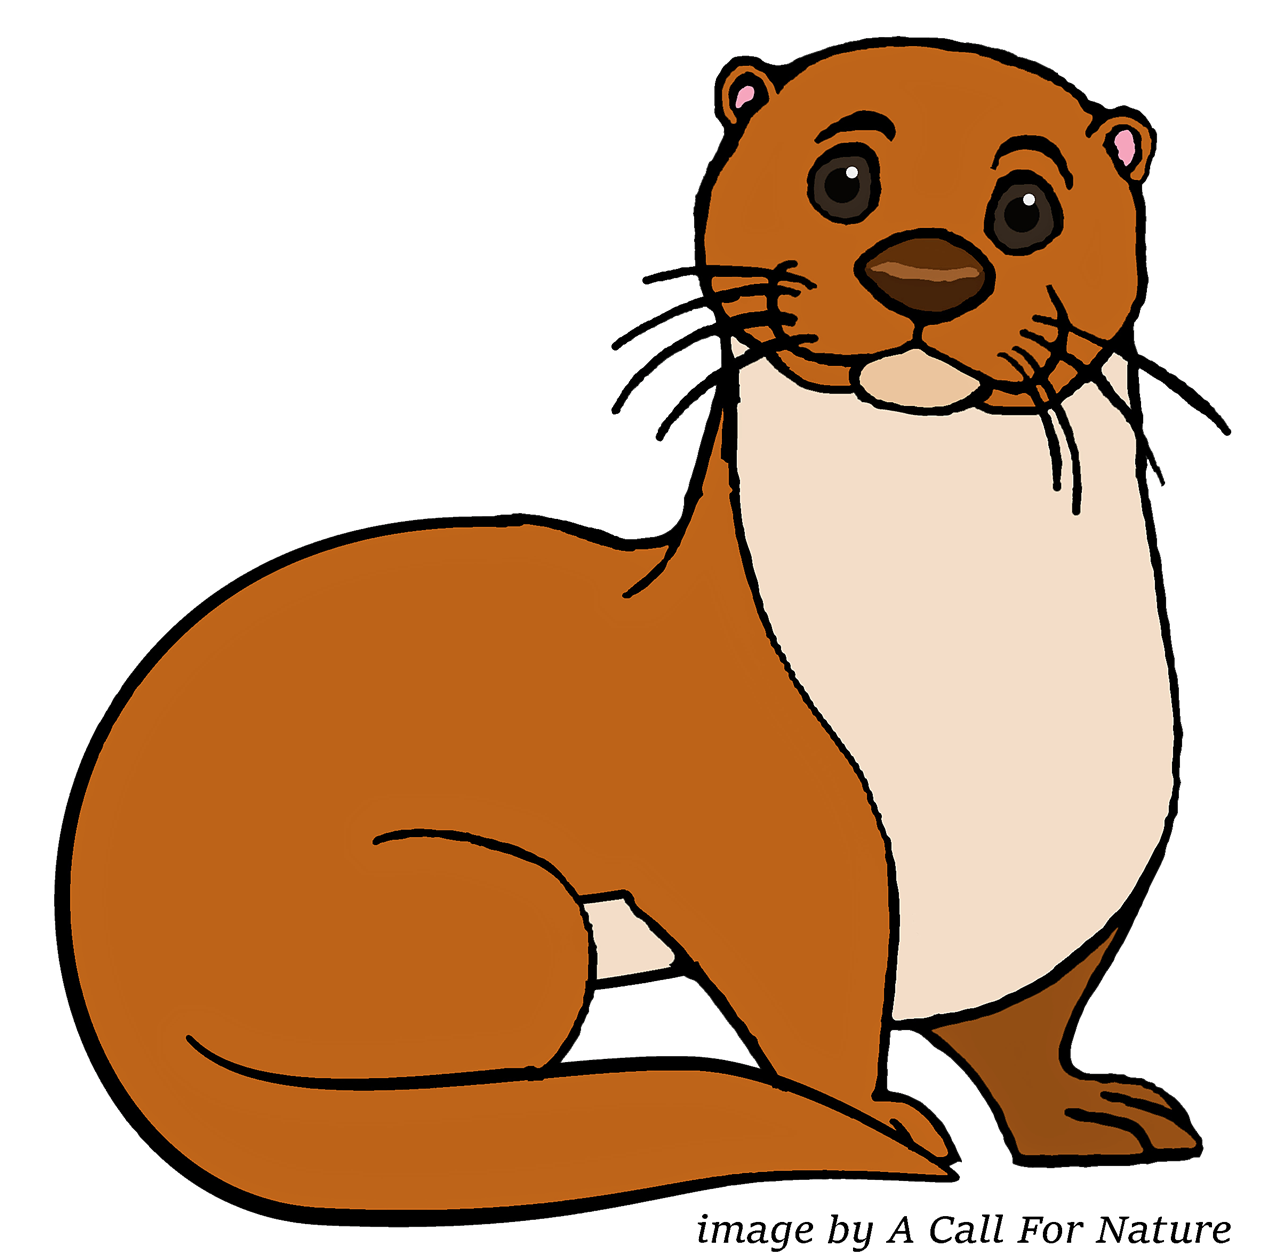 Otter clipart weasel, Otter weasel Transparent FREE for download on